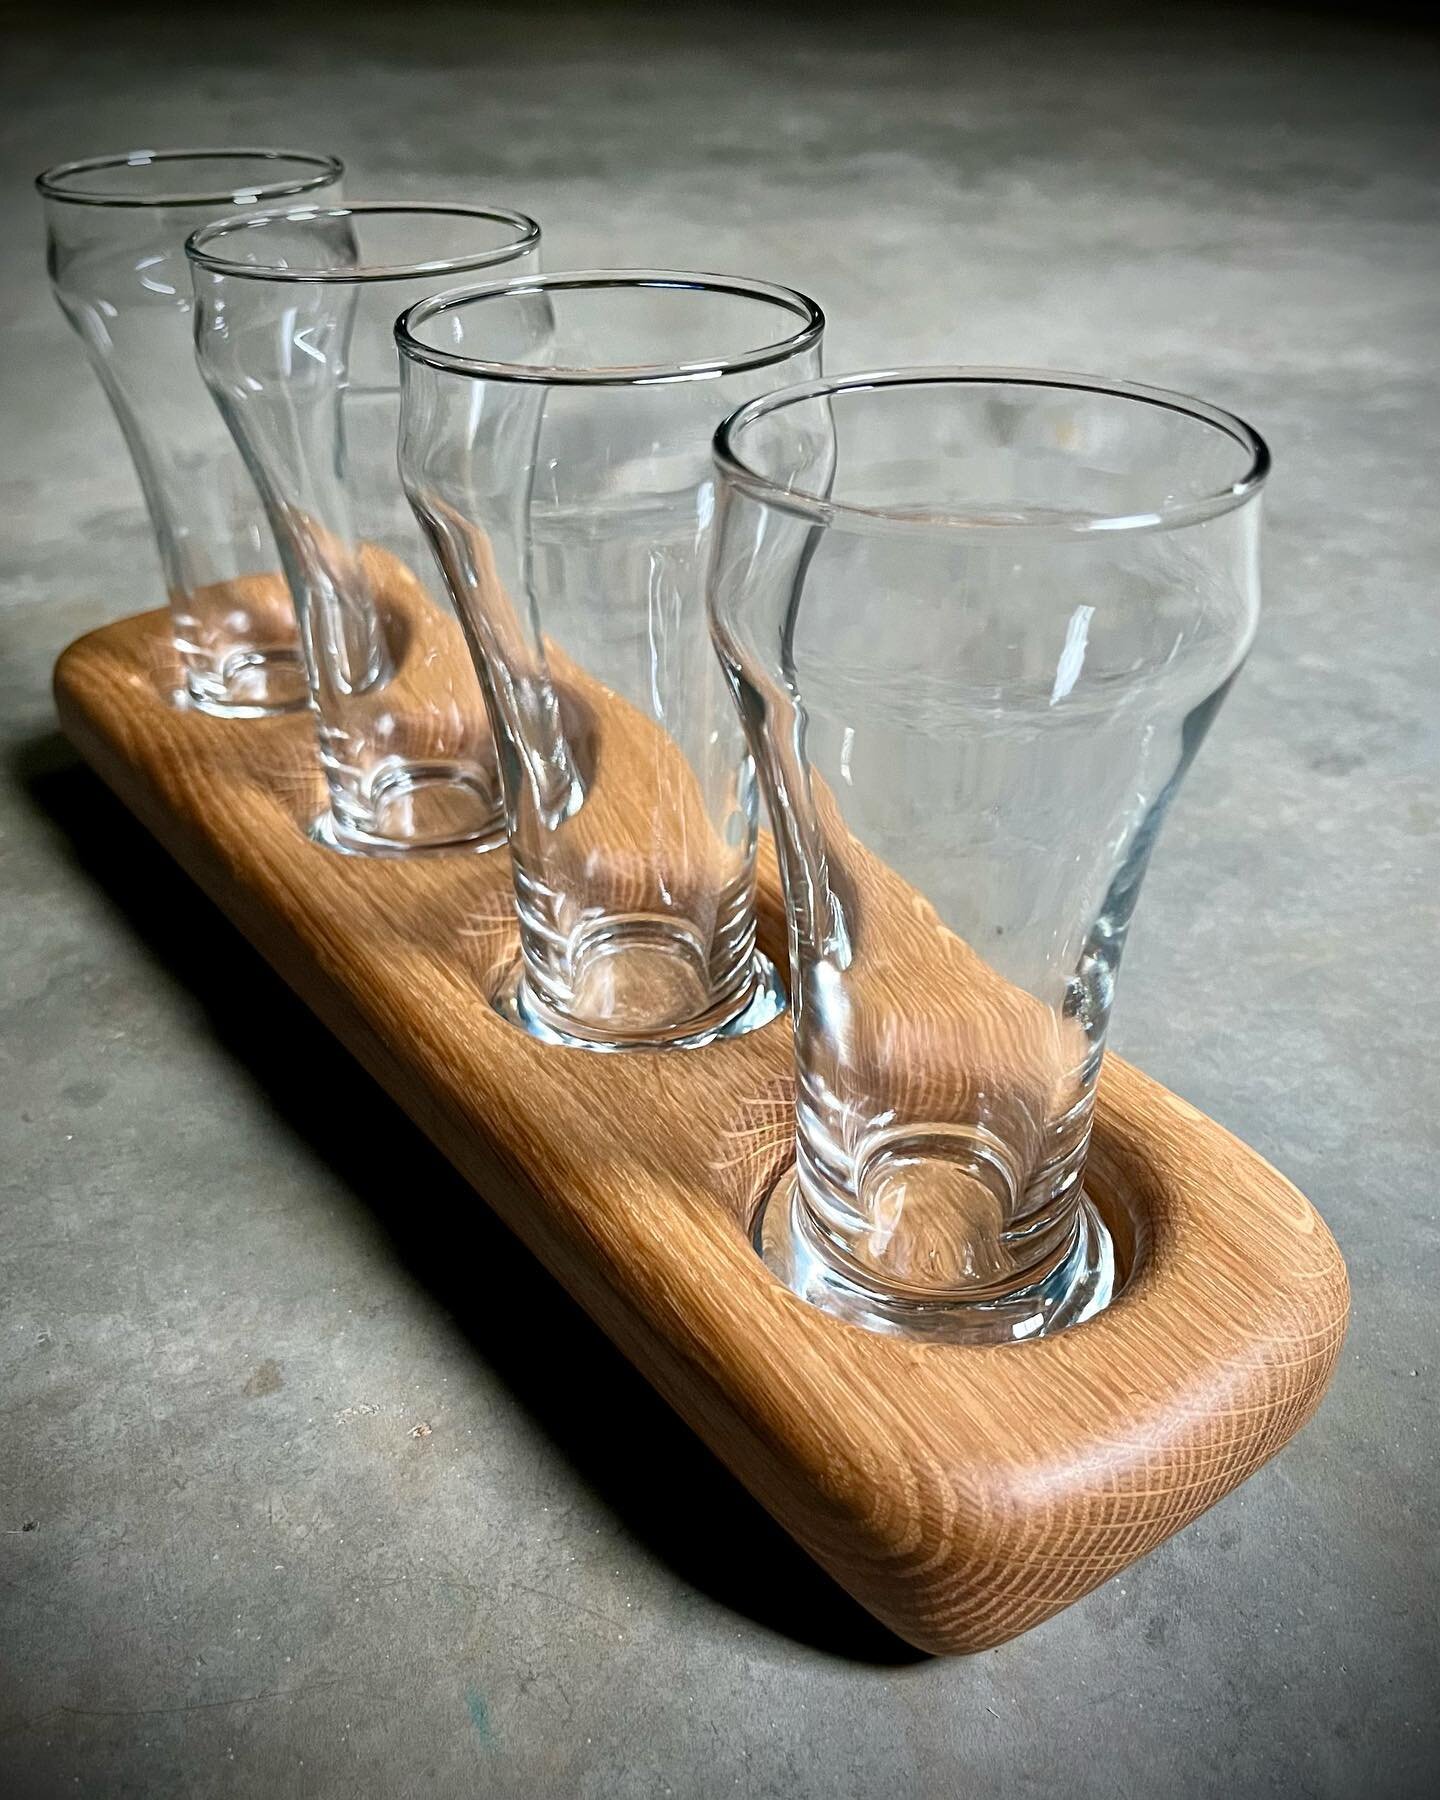 Simple #WhiteOak beer flight blocks. 

Show your friends that you&rsquo;re a bit of an aristocrat when it comes to sipping on short pours. Pinkies up! 

More and more products coming out of the shop every day as we get closer to the holidays. Pick up